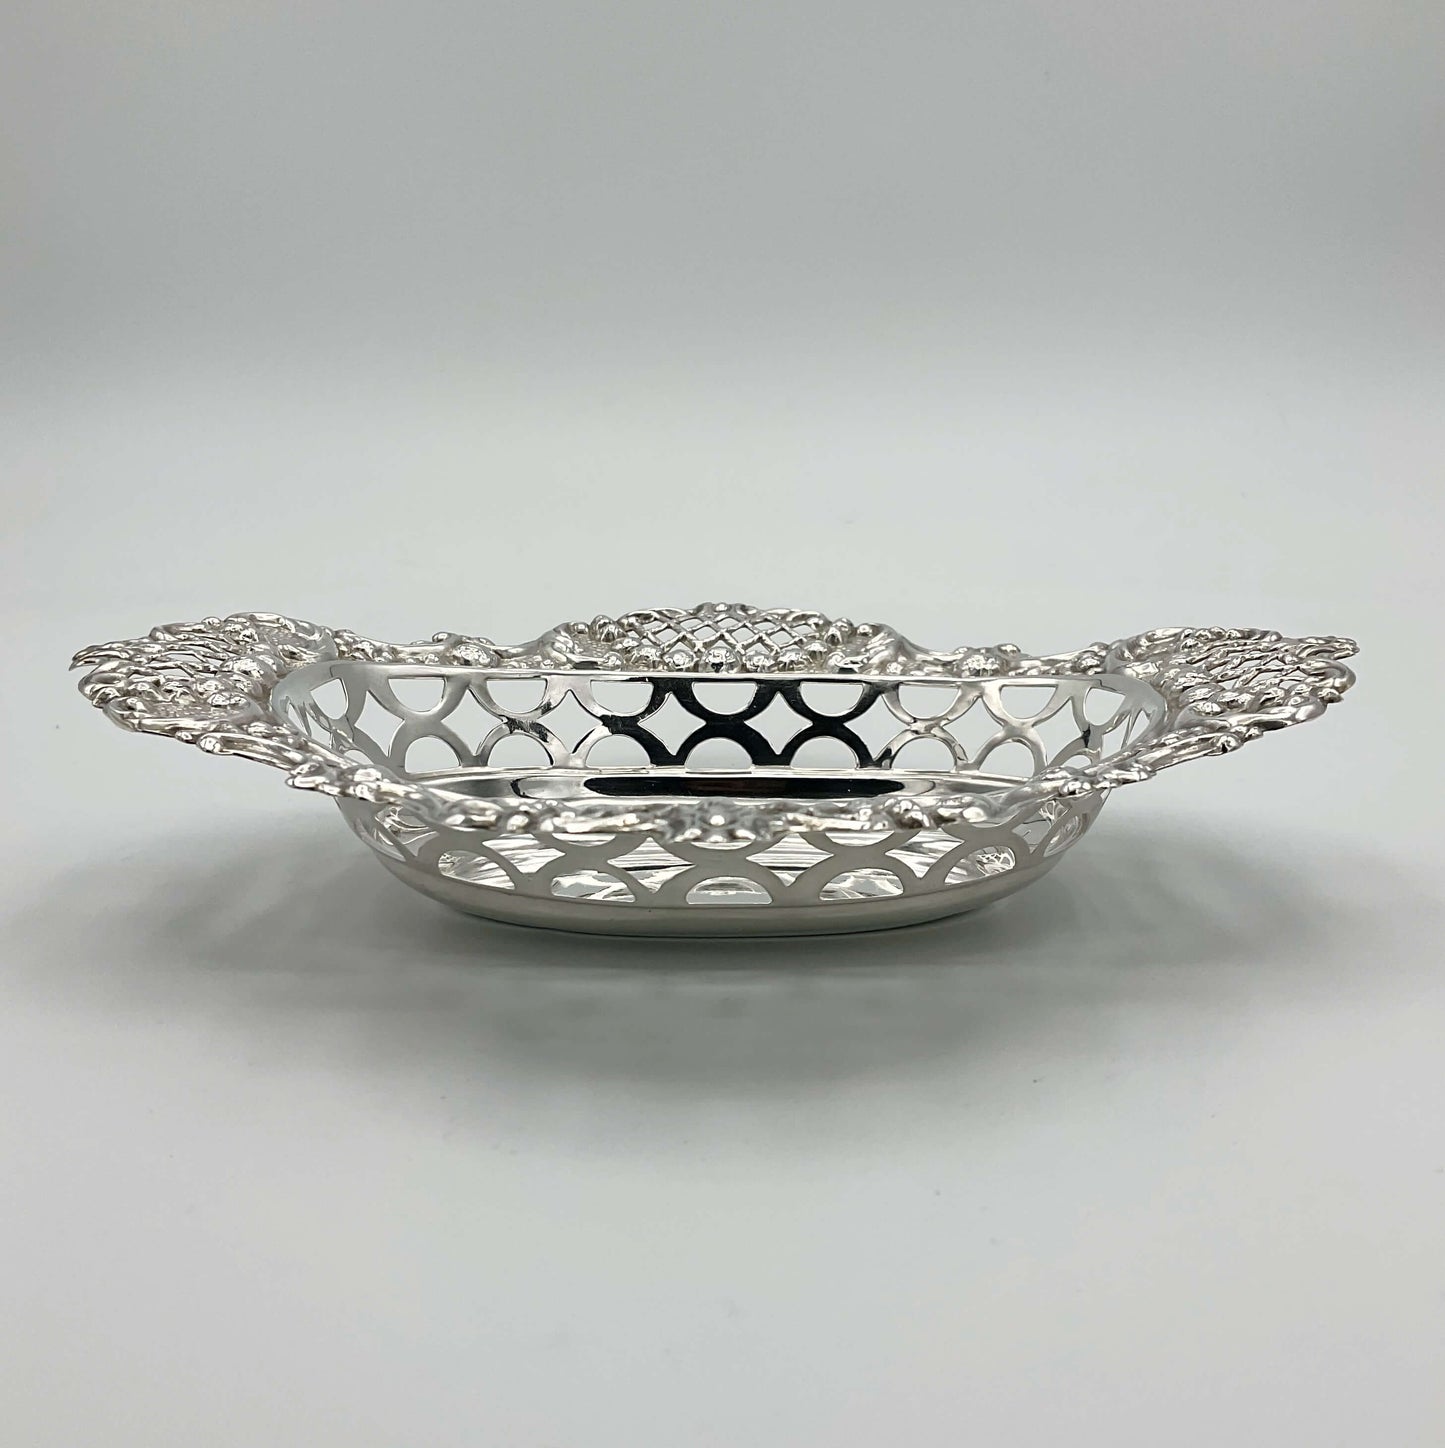 Side view of beautiful pierced silver bowl